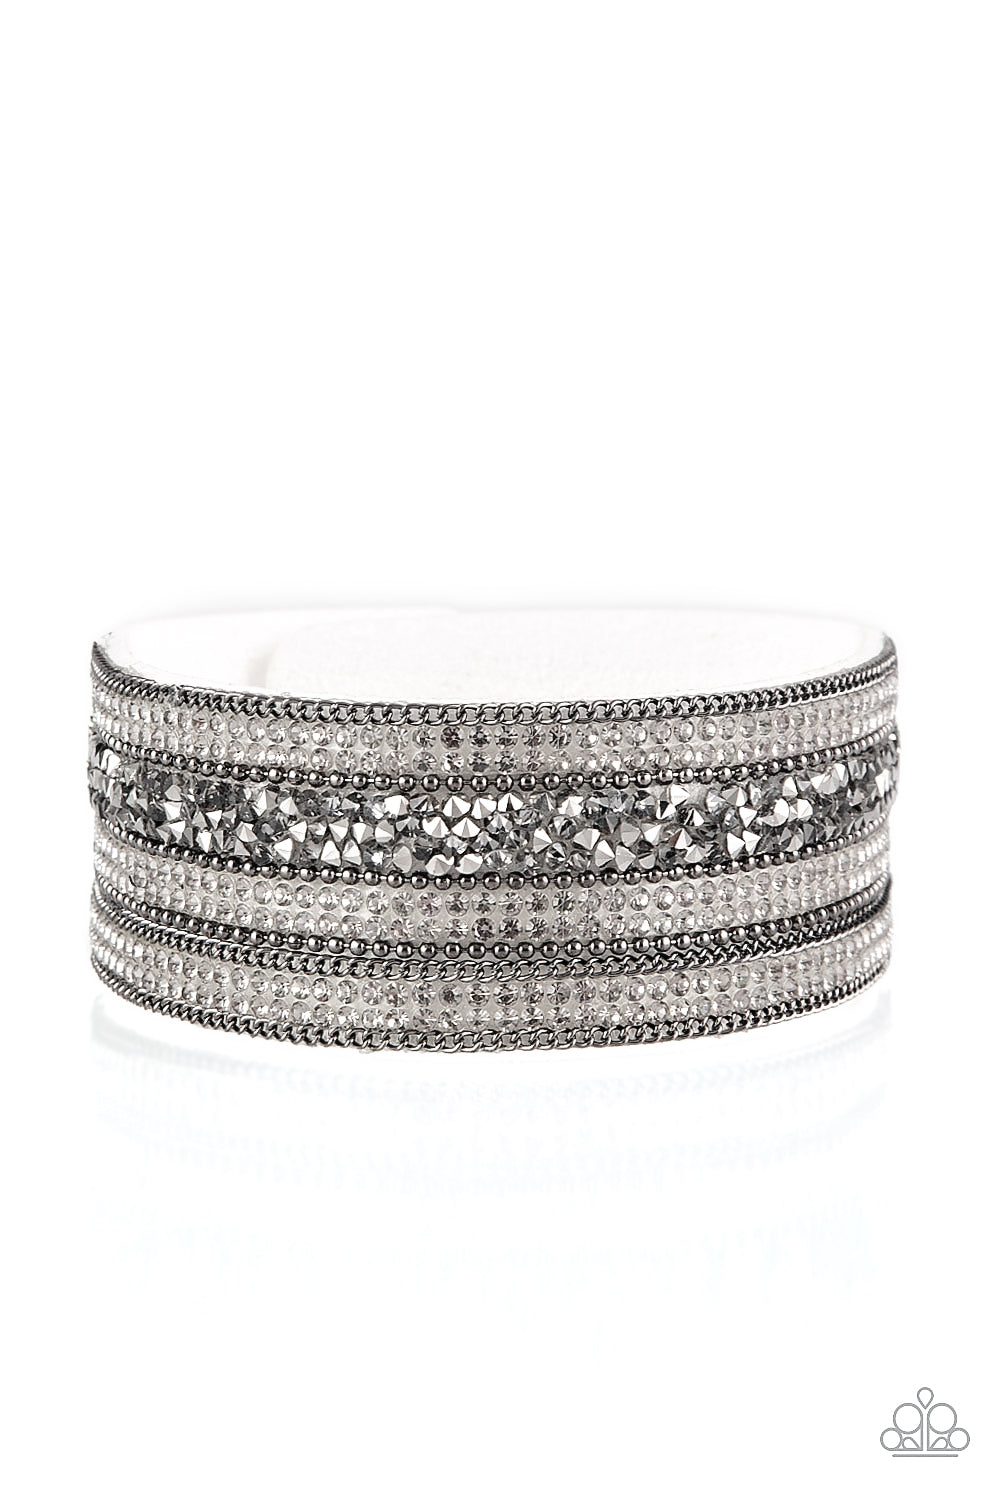 five-dollar-jewelry-really-rock-band-white-bracelet-paparazzi-accessories